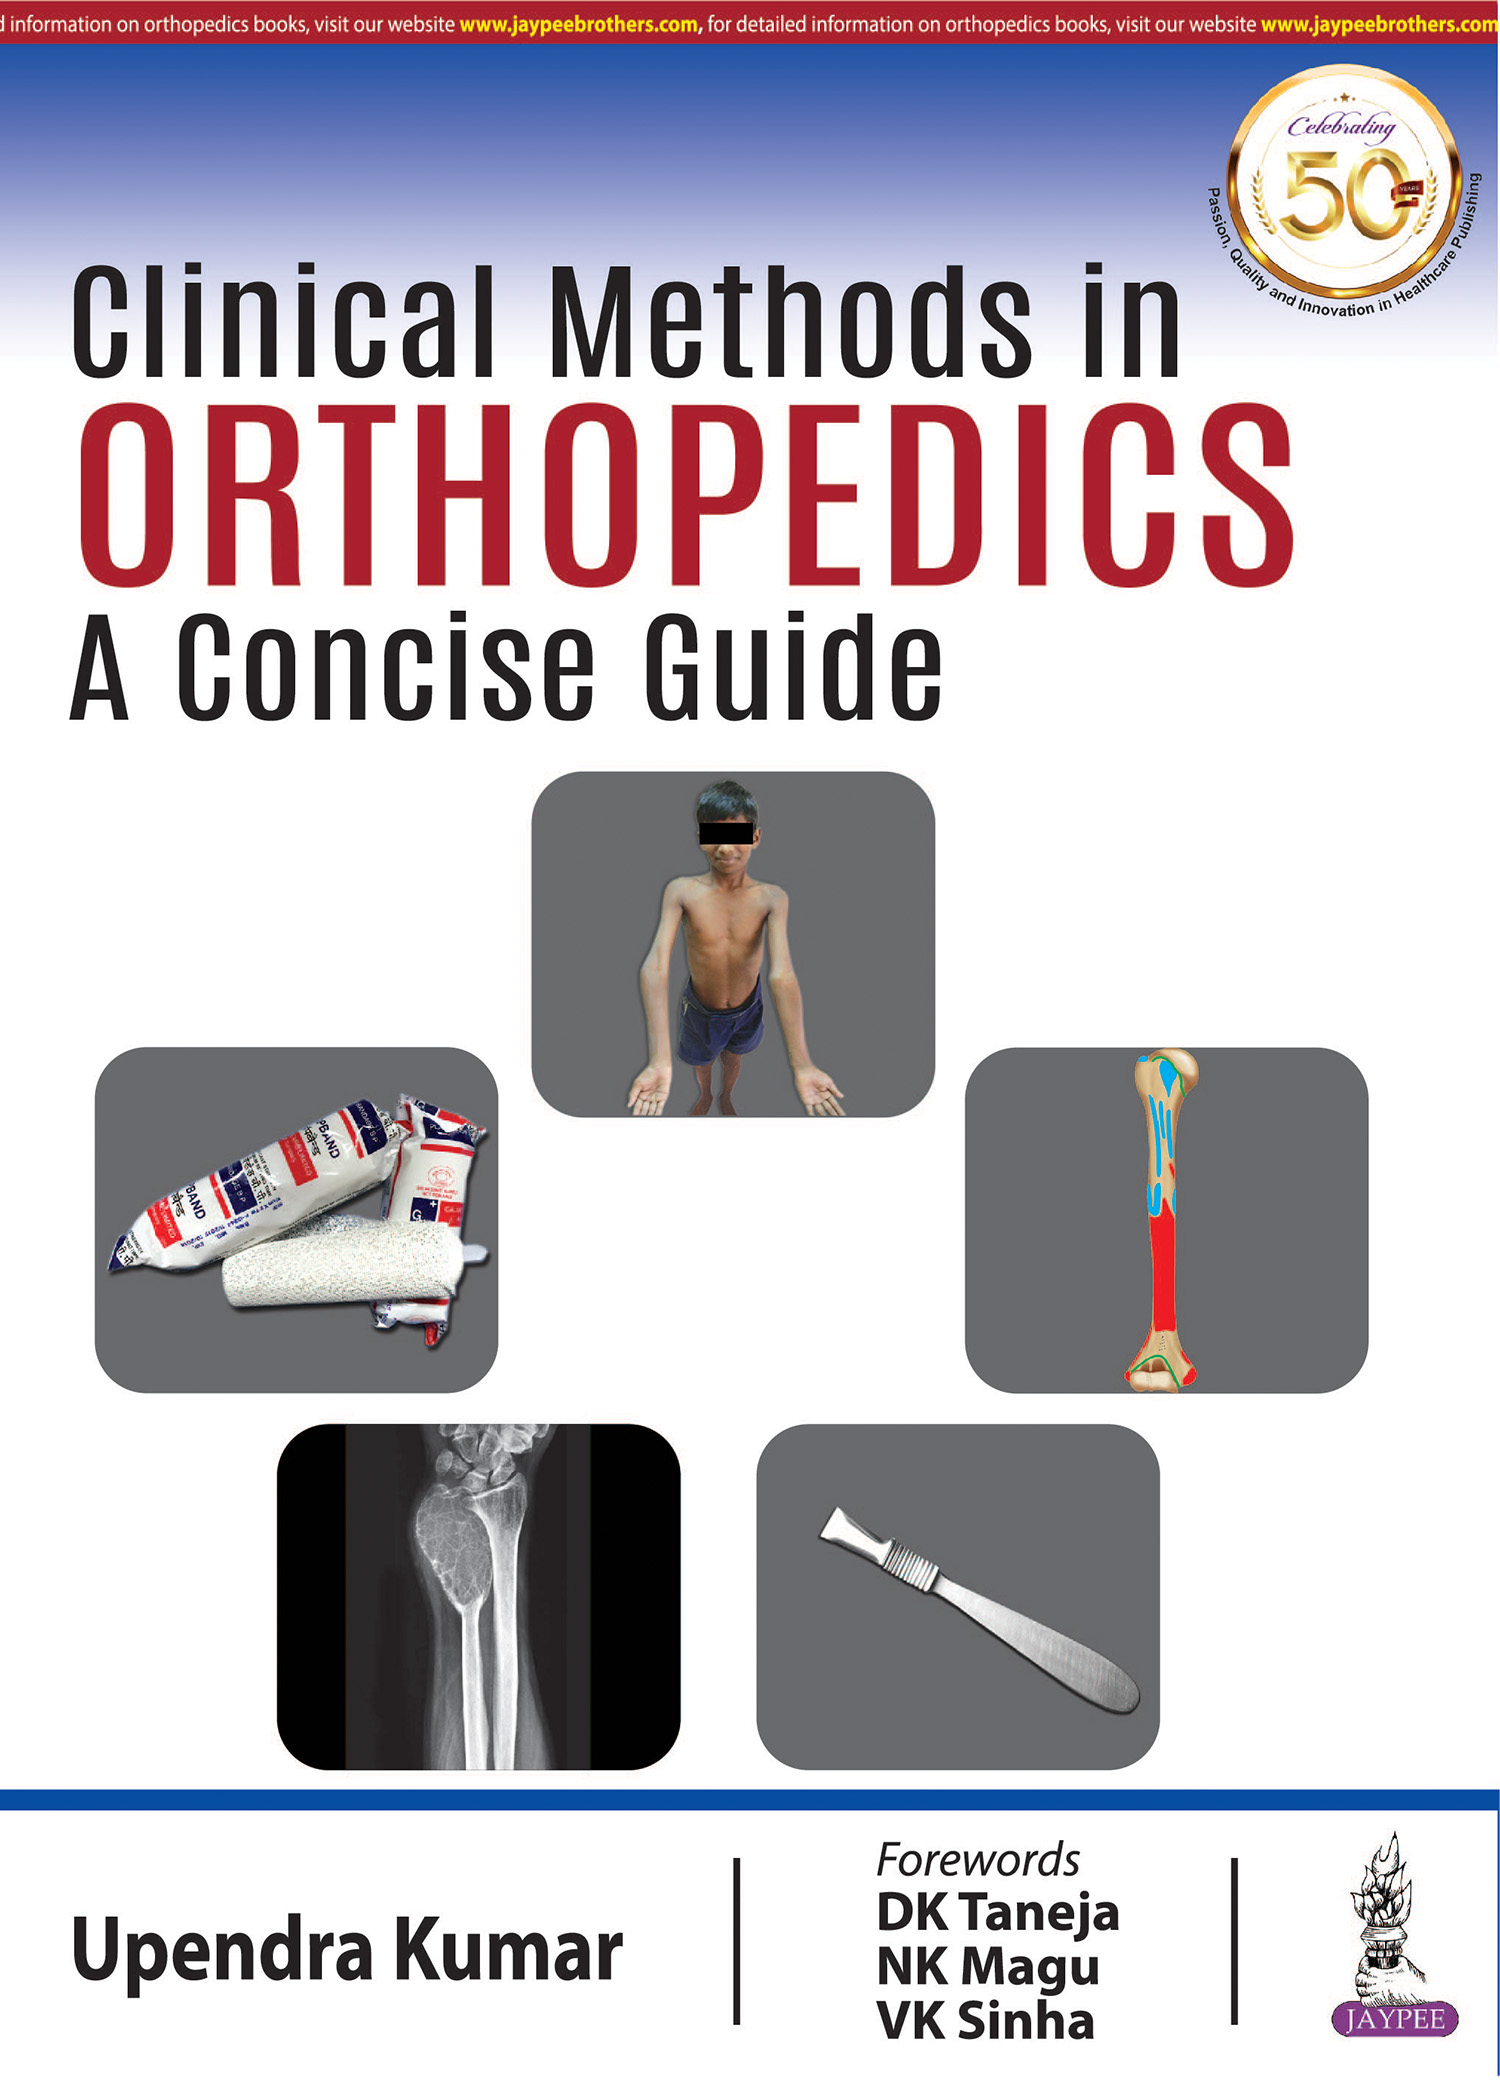 Clinical Methods In Orthopedics: A Concise Guide